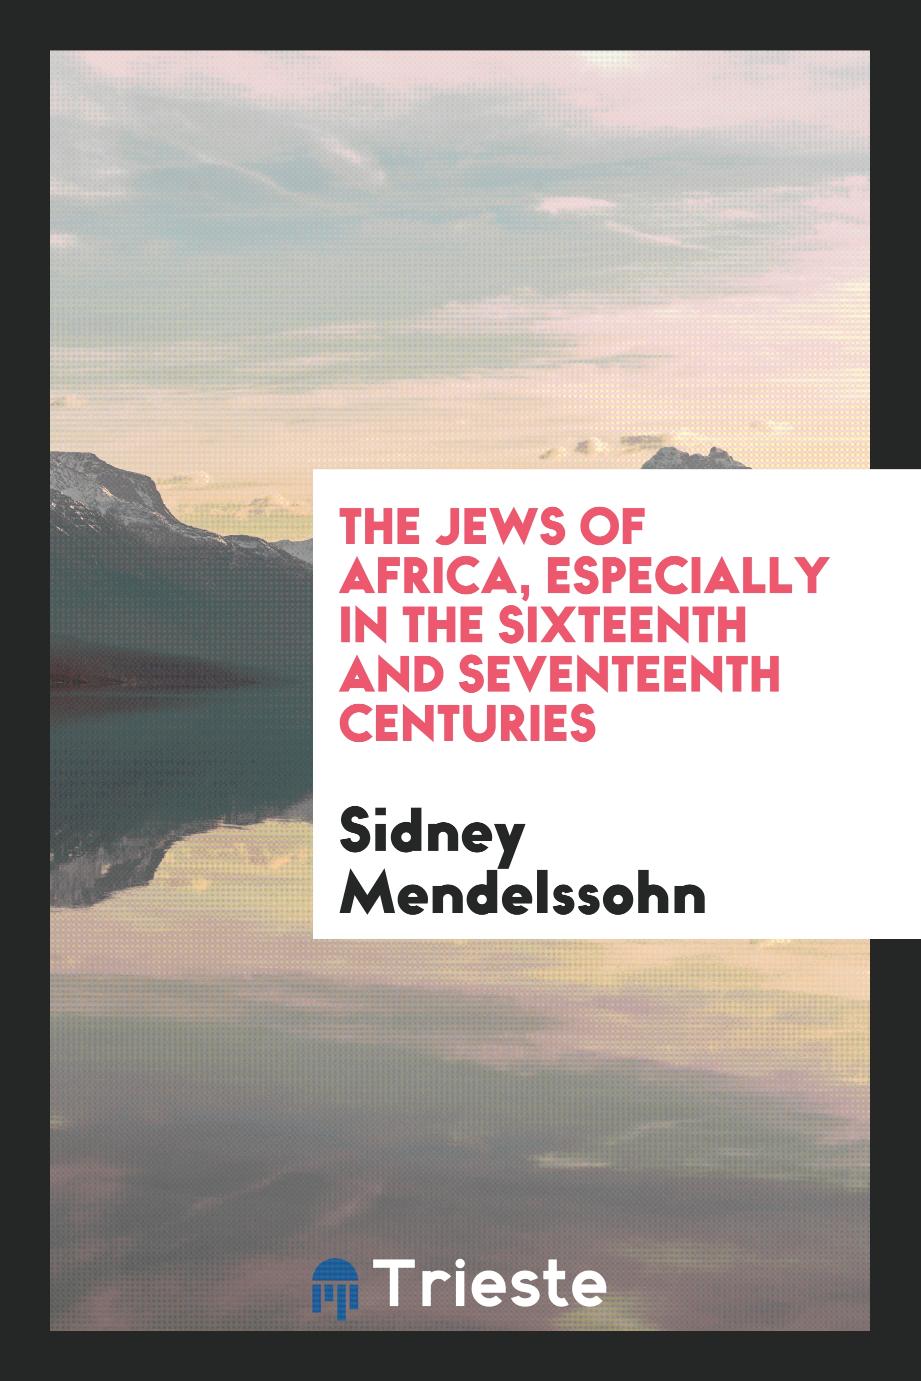 The Jews of Africa, especially in the sixteenth and seventeenth centuries